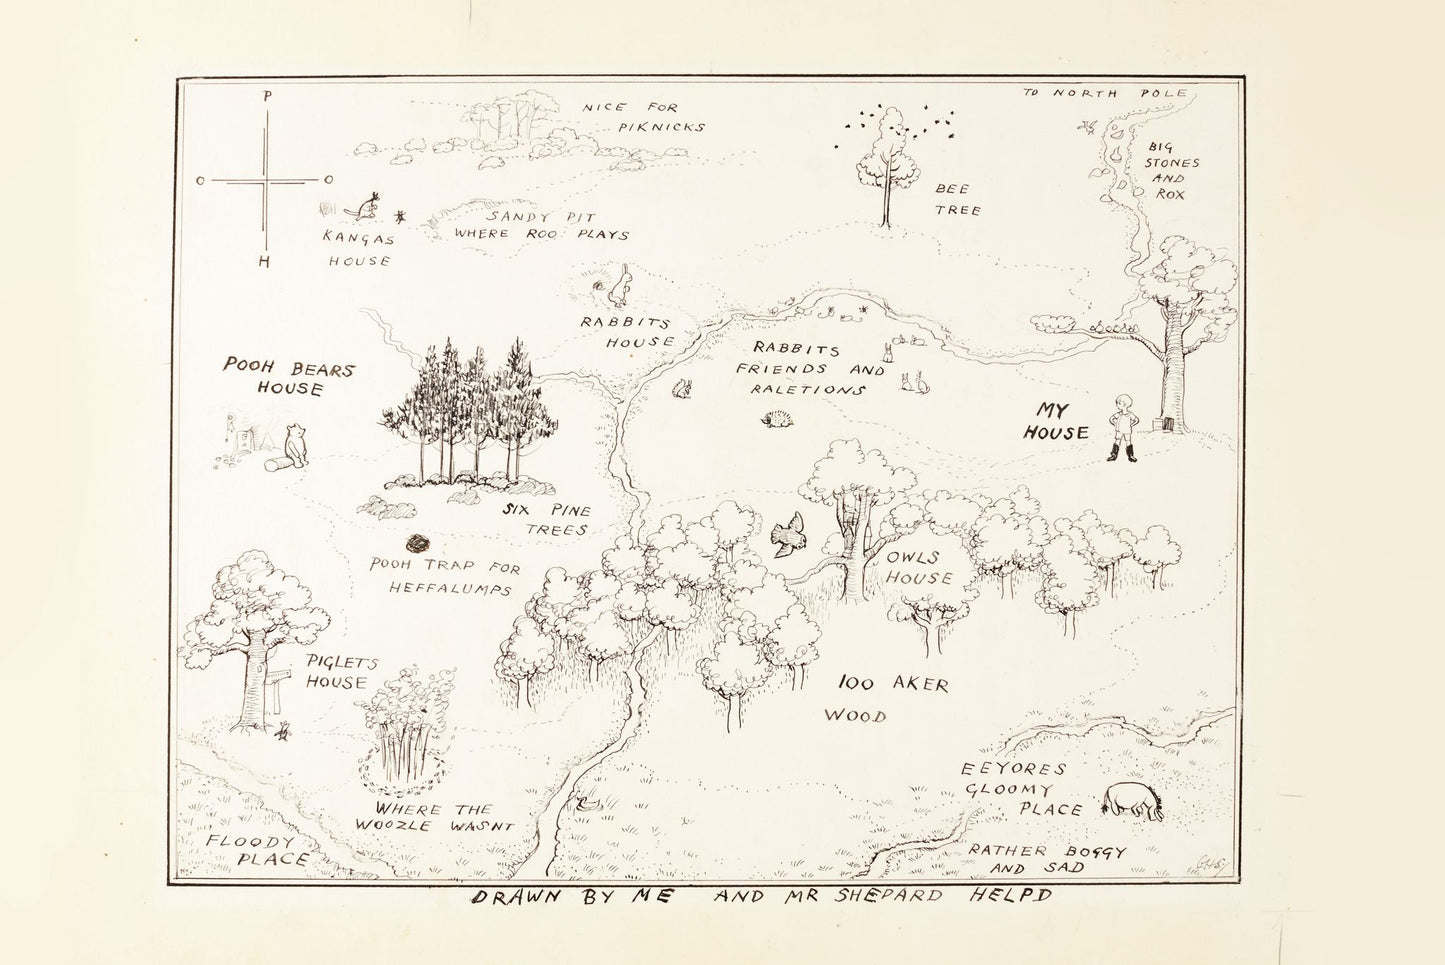 Hundred acre wood map (1920s) | EH Shepard | Pooh Bear Drawings Posters, Prints, & Visual Artwork The Trumpet Shop Vintage Prints   